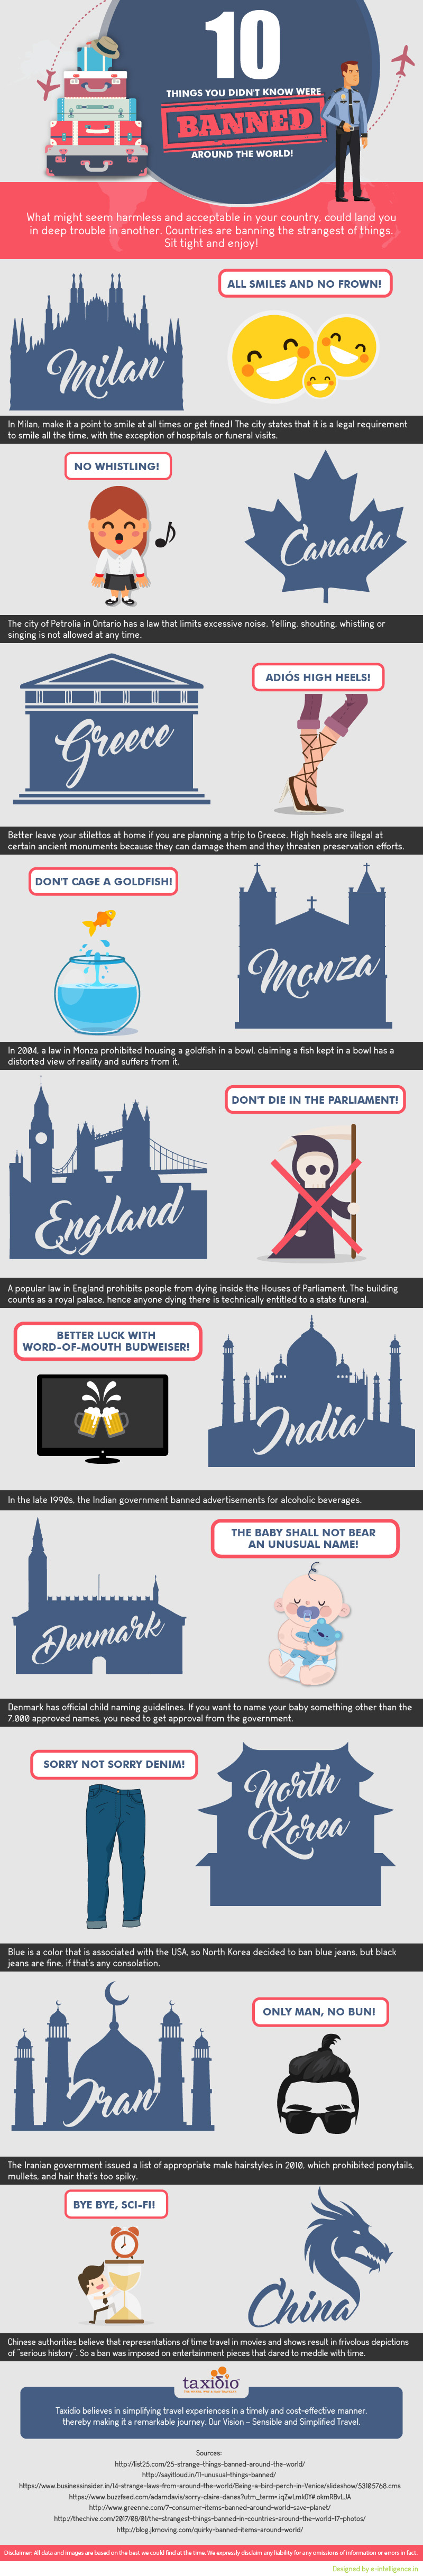 10 Things You Didn’t Know Were Banned Around The World